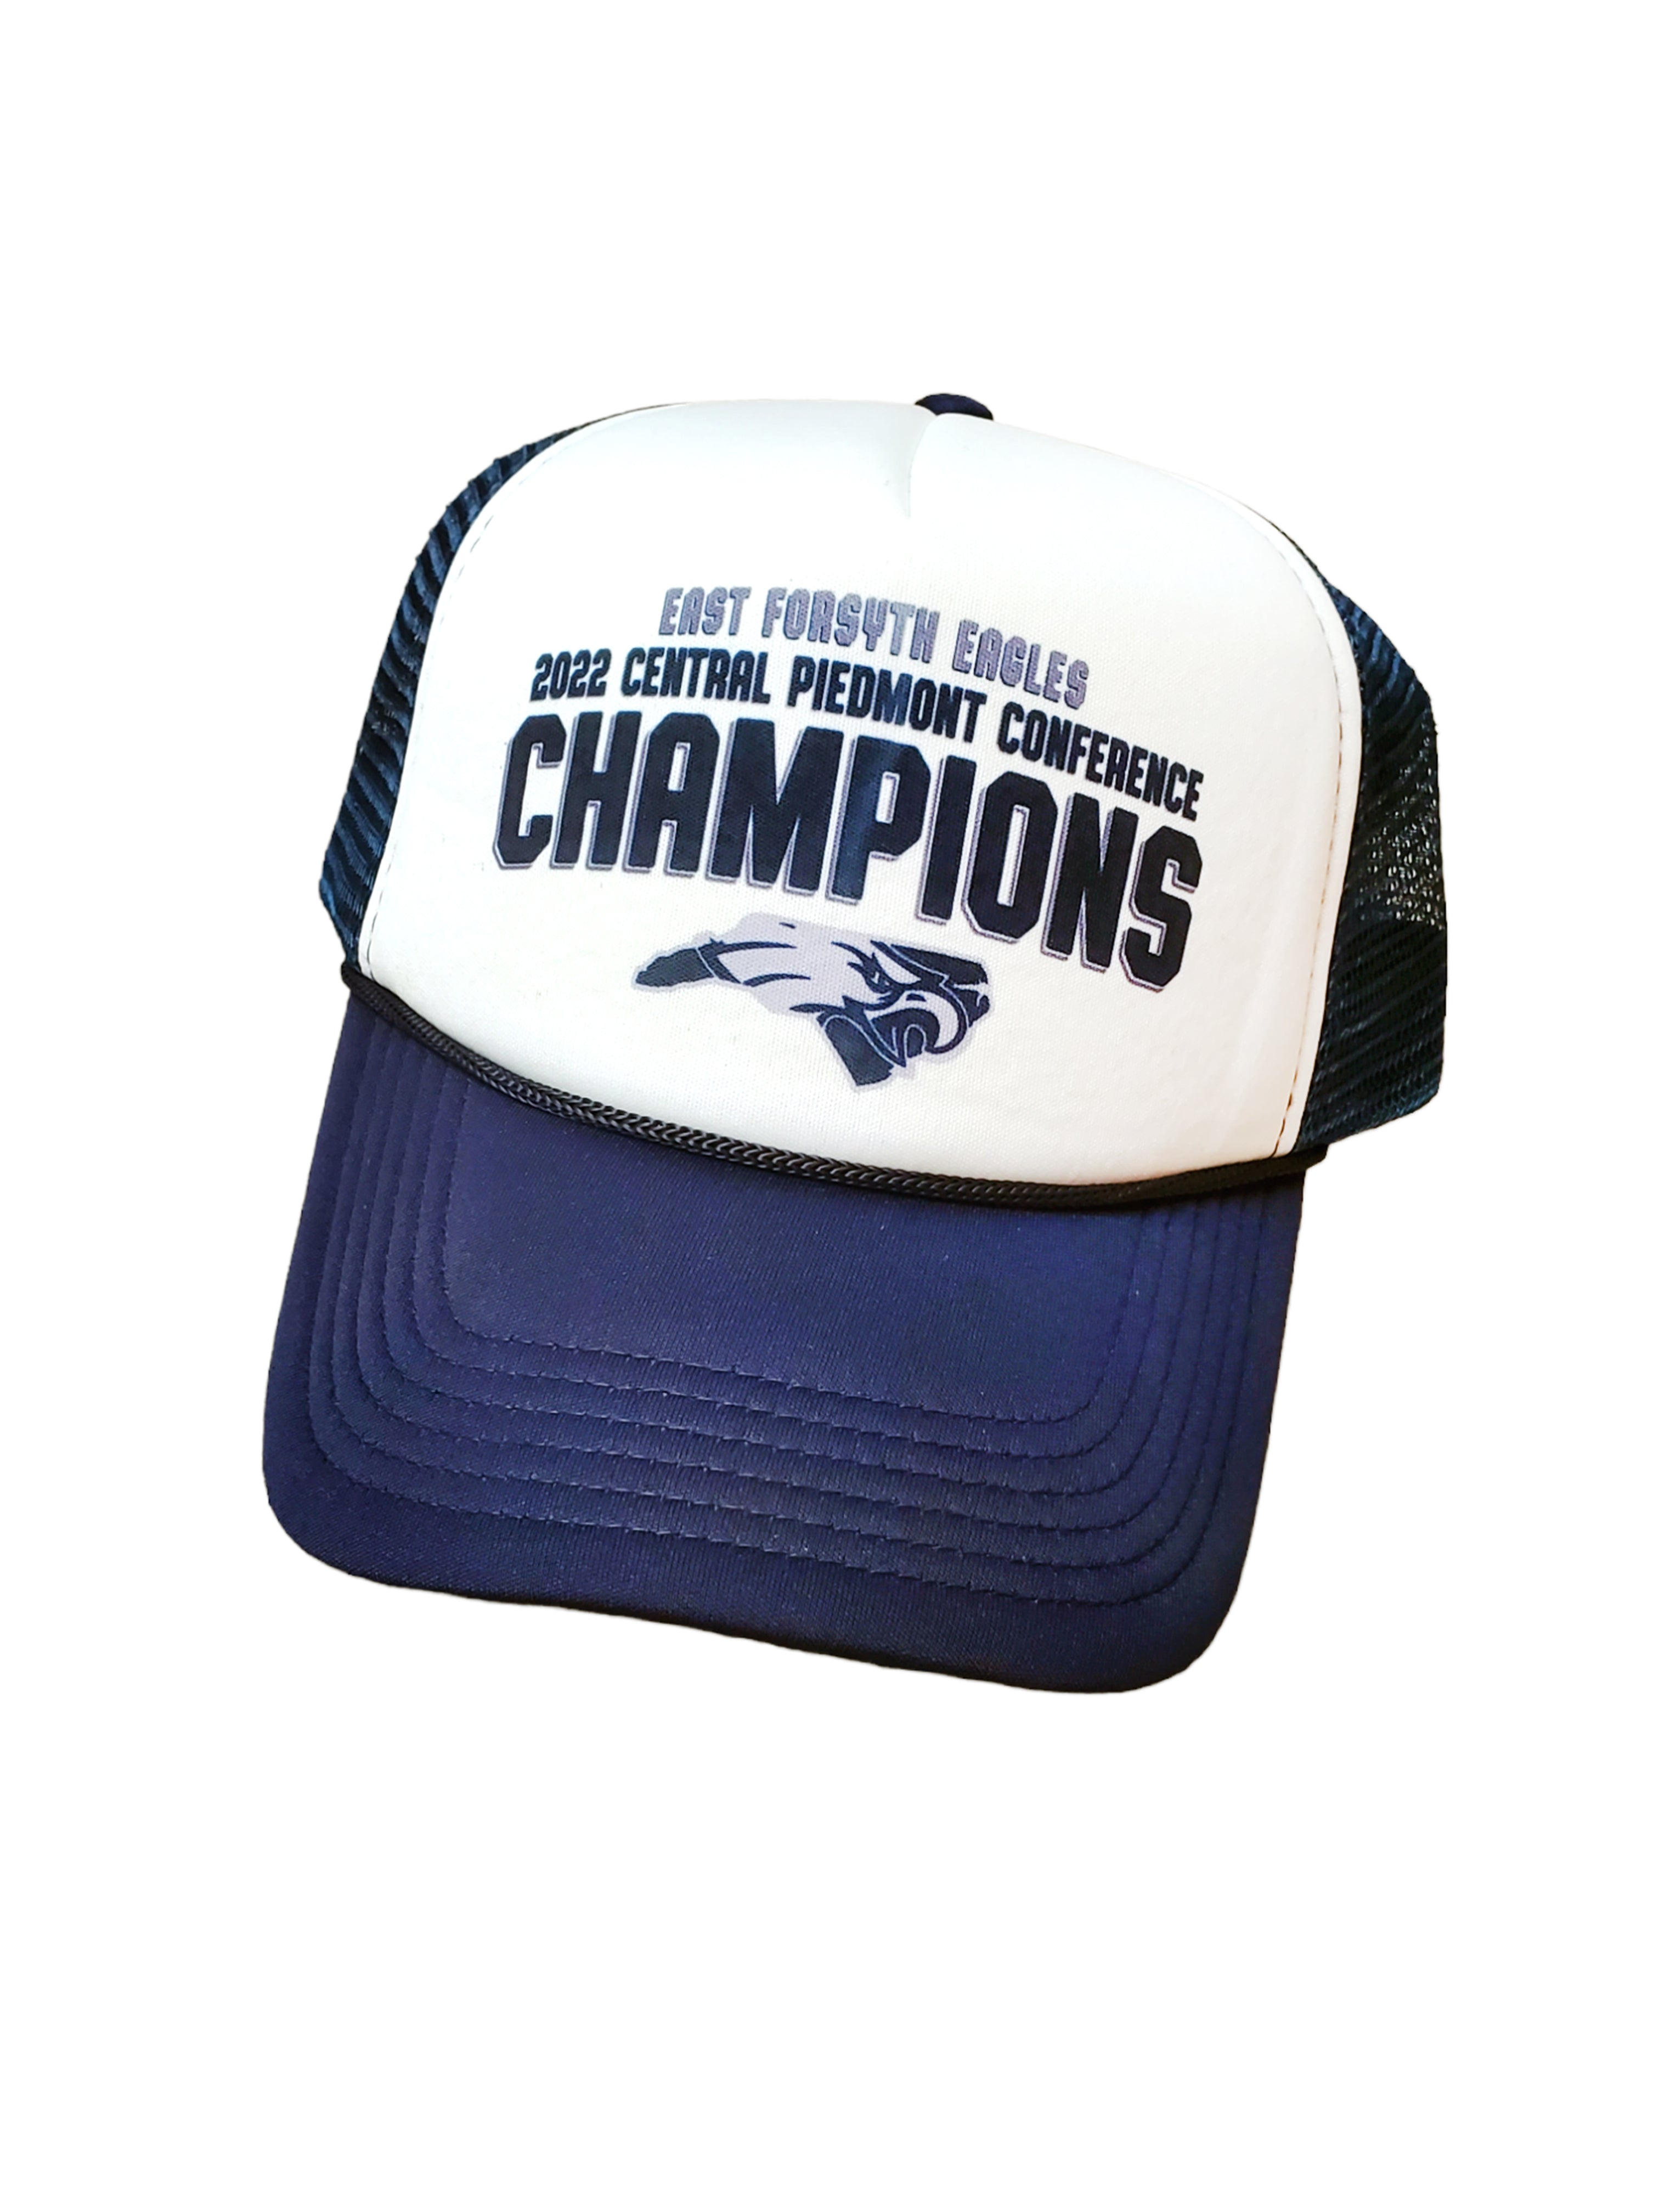 2022 Central Piedmont Conference Champions Trucker Hat, Navy blue and